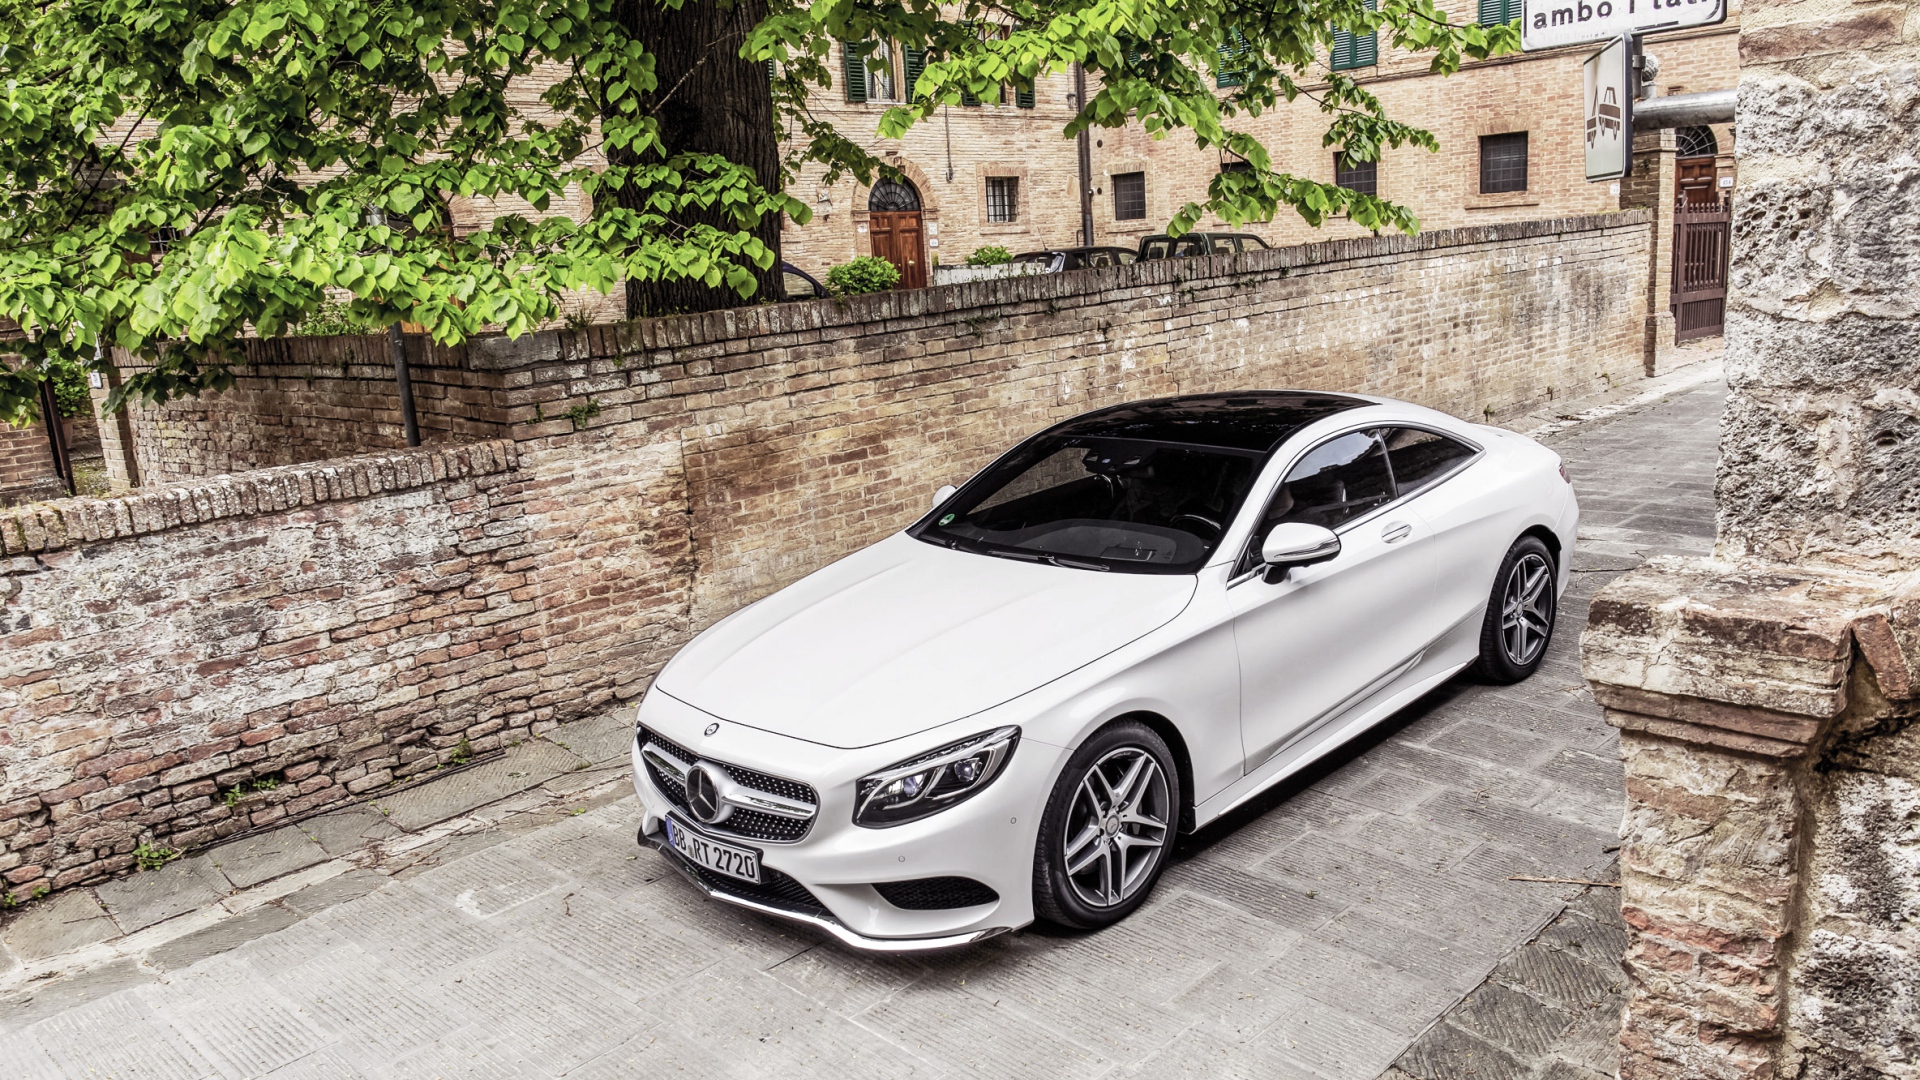 1920x1080 Mercedes benz S class Coupe White Wallpaper Background 1920x1080